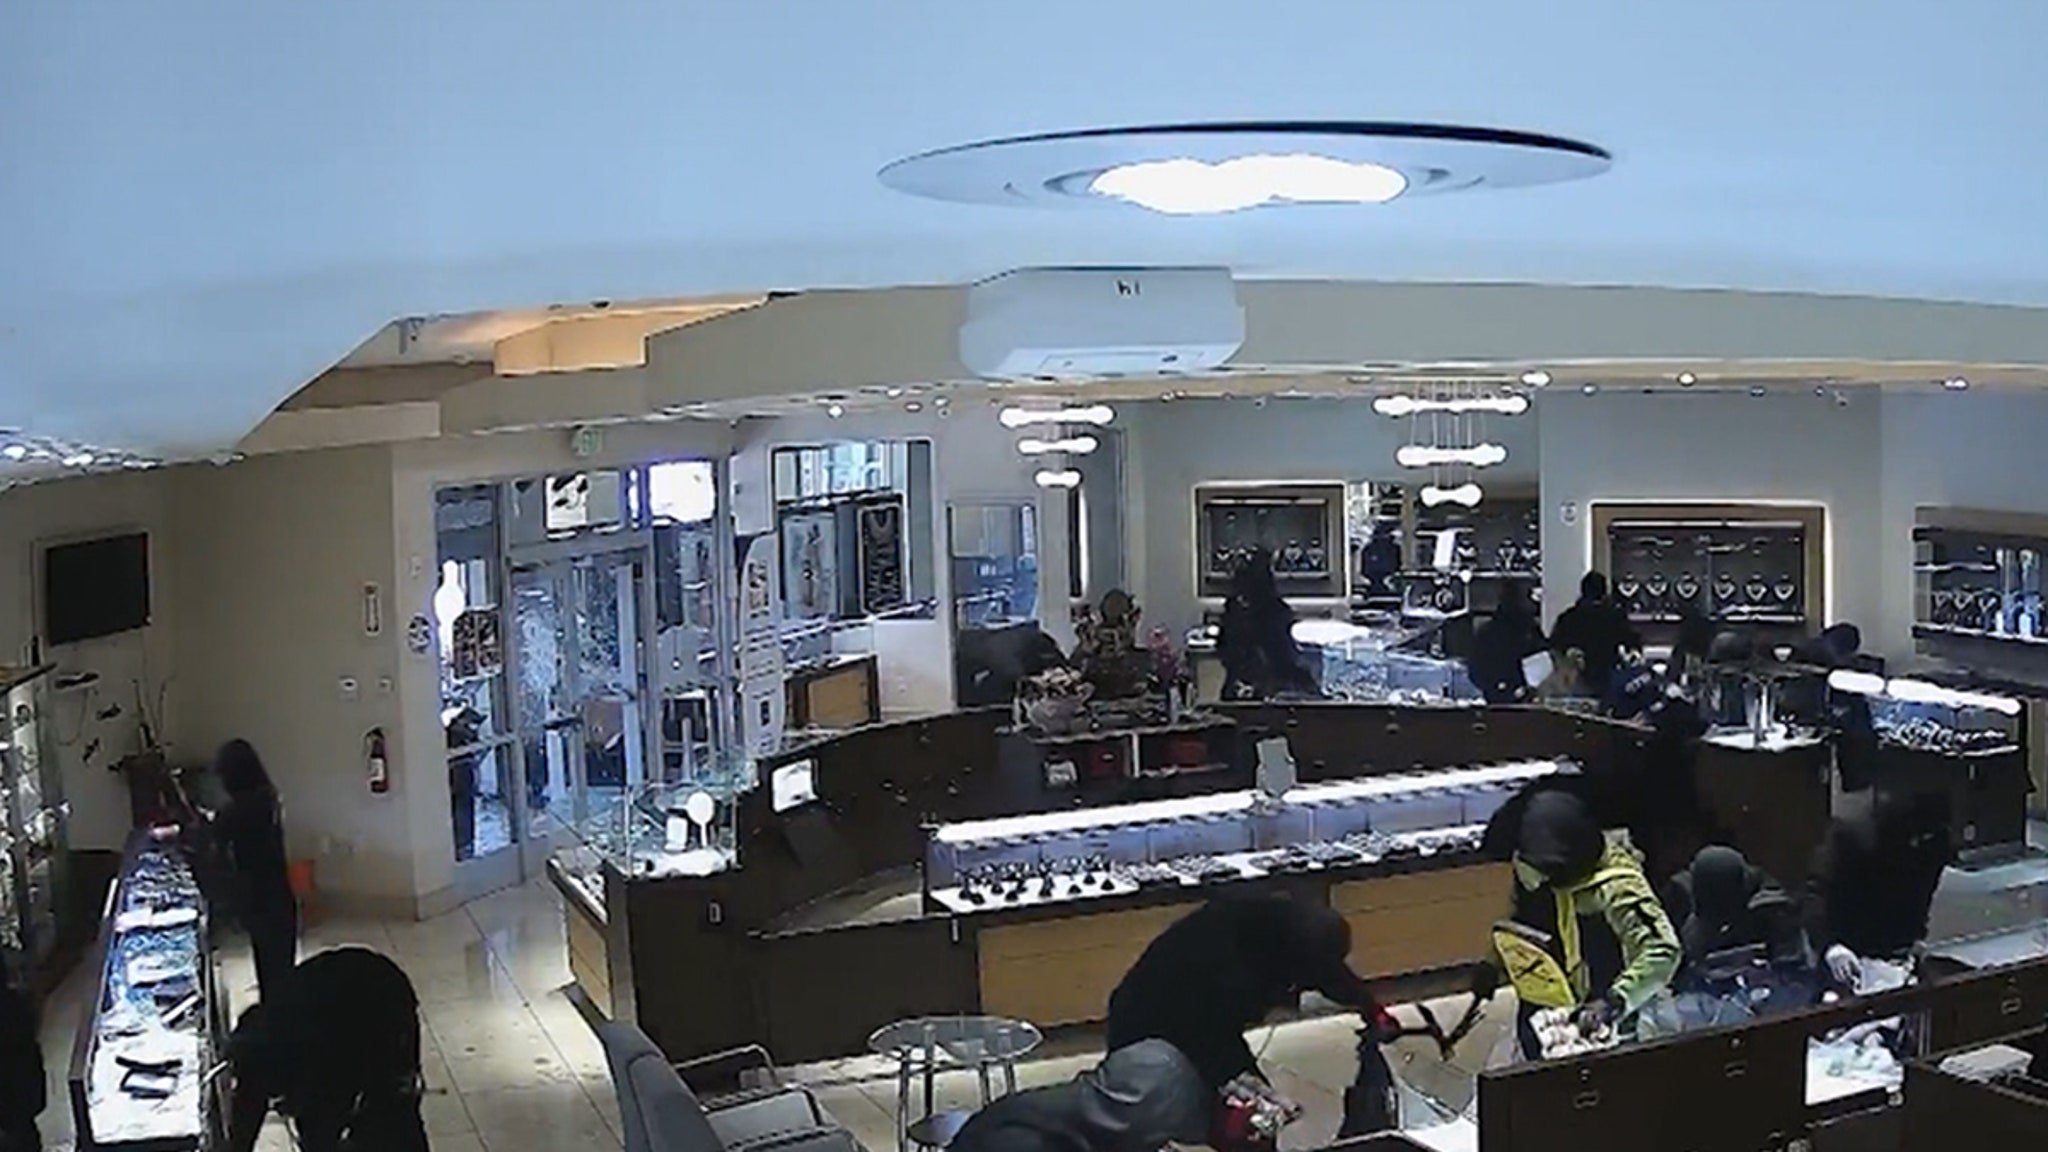 Bay Area Jewelry Store Ransacked By Gang of 20 in Broad Daylight, Wild Video